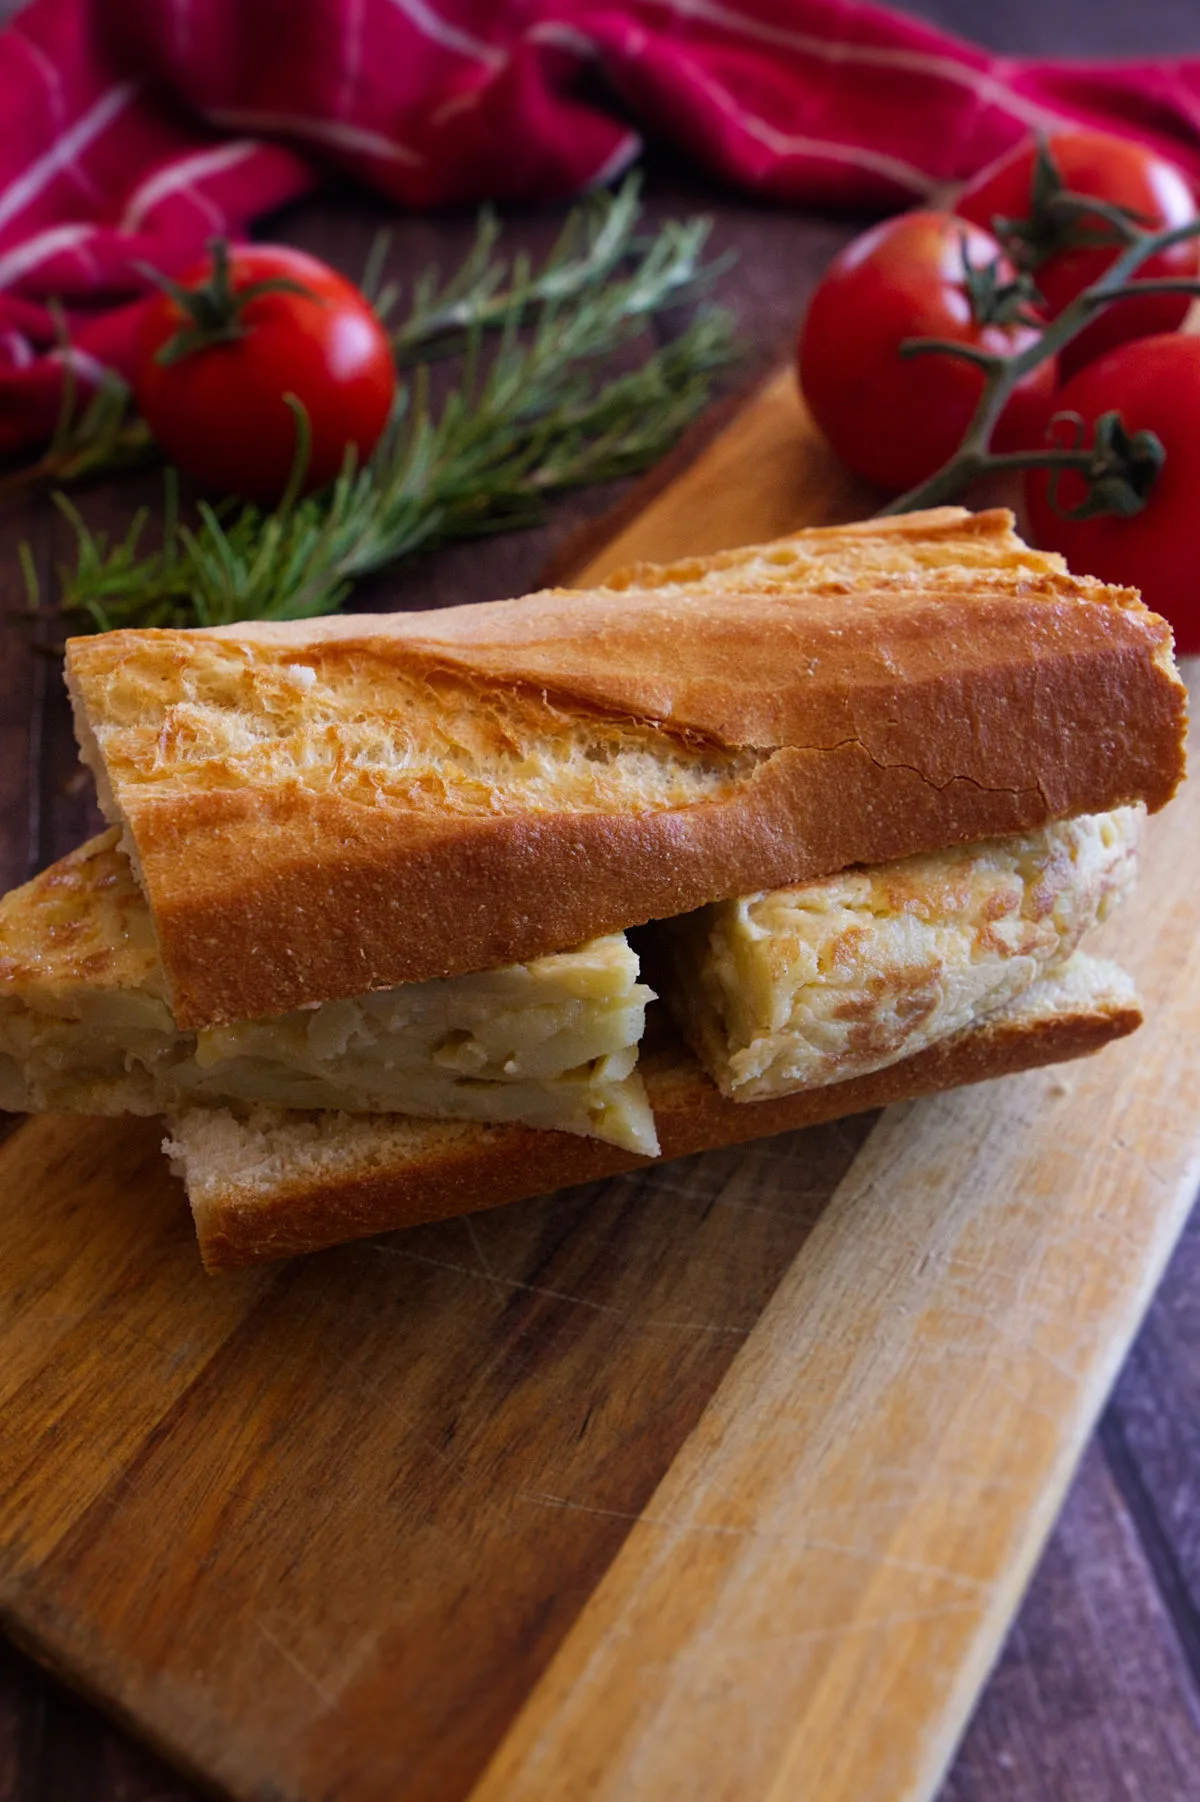 a portion of bocadillo de tortilla is served on a wooden chopping board.